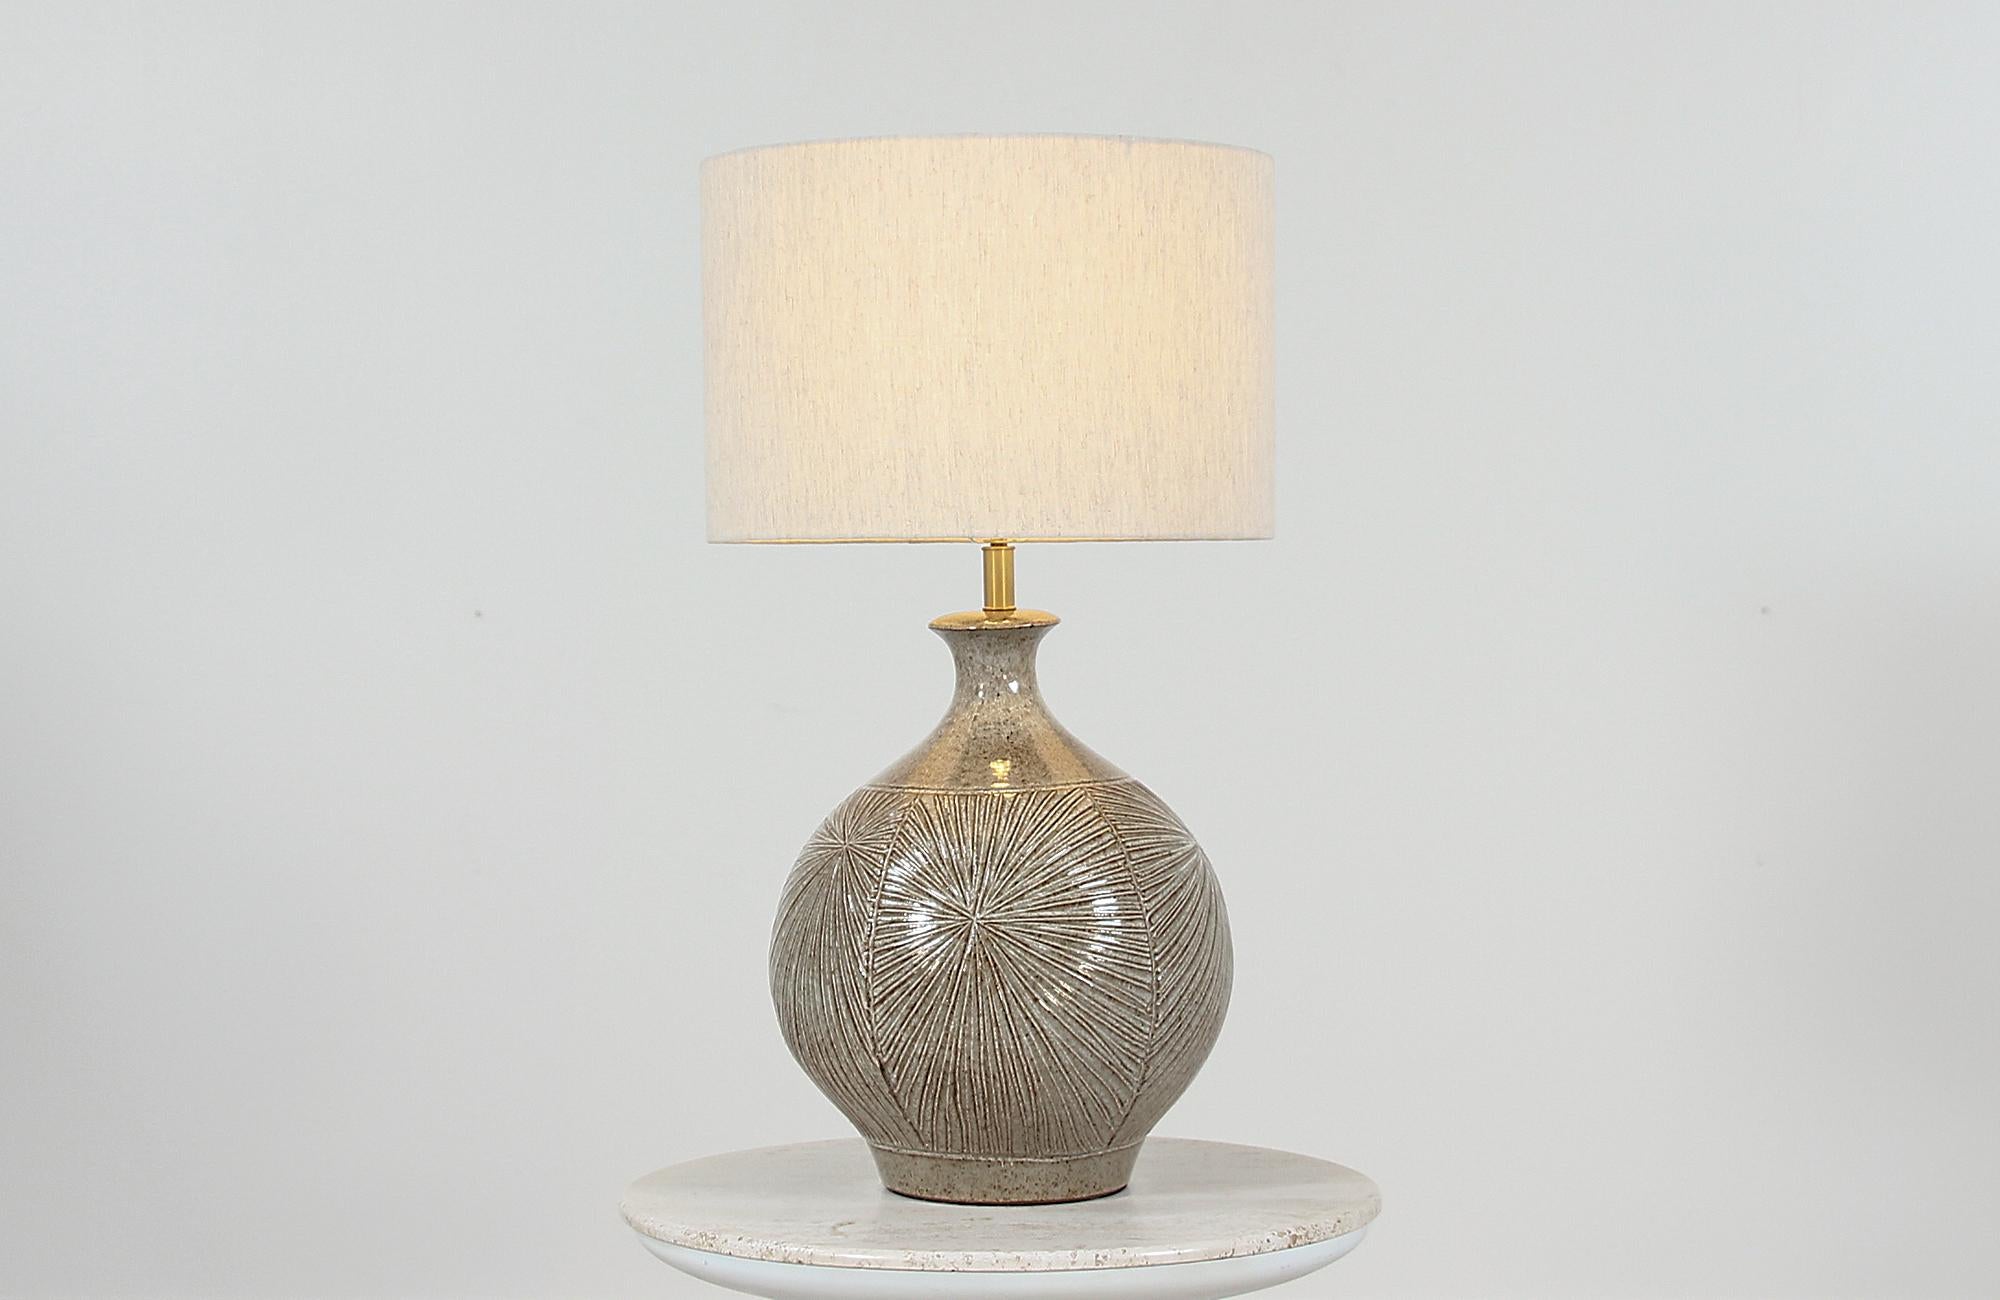 California modern table lamp designed by Modernist duo David Cressey and Robert Maxwell for Architectural Pottery in the United States, circa 1970s. This beautifully sculpted table lamp is part of the Earthgender collection from the collaboration of